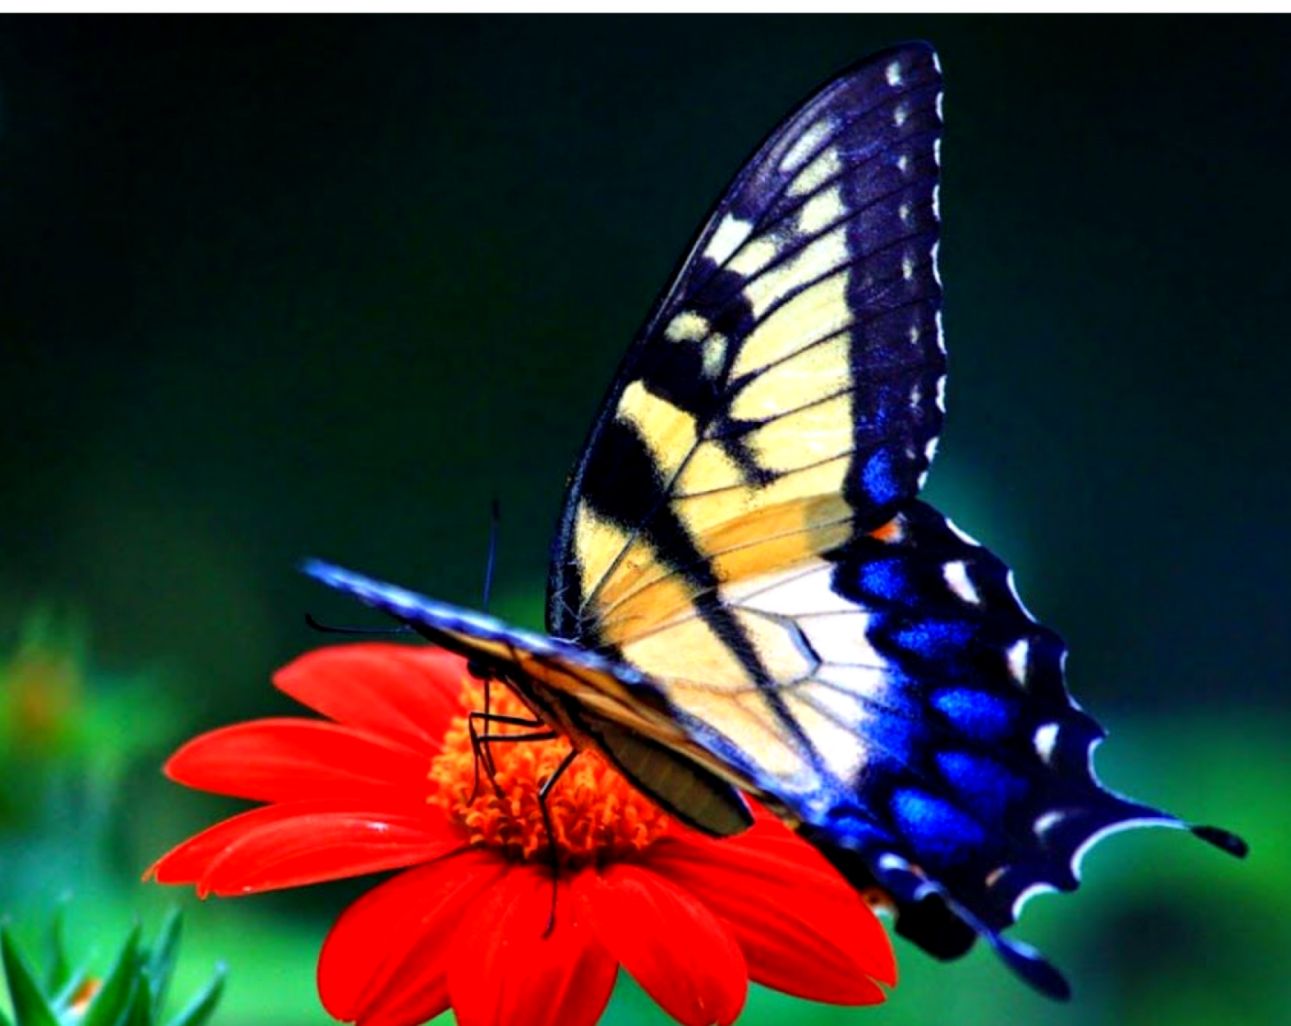 55 Colorful 【butterfly】hd Free Images Wallpapers Download - Cool Pictures Of Butterflies , HD Wallpaper & Backgrounds